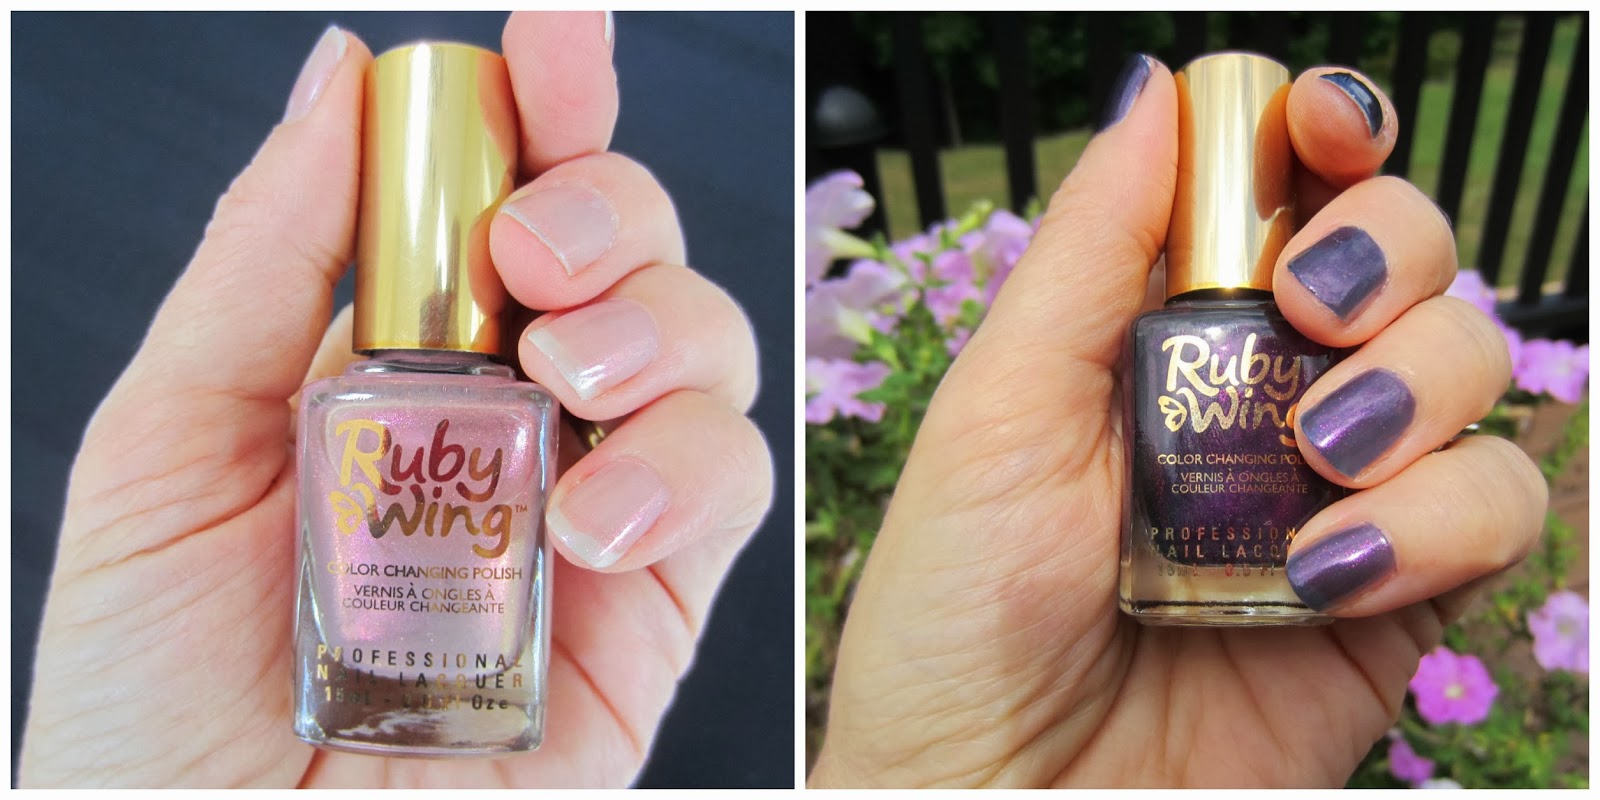 3. Ruby Wing Color Changing Nail Polish - wide 6